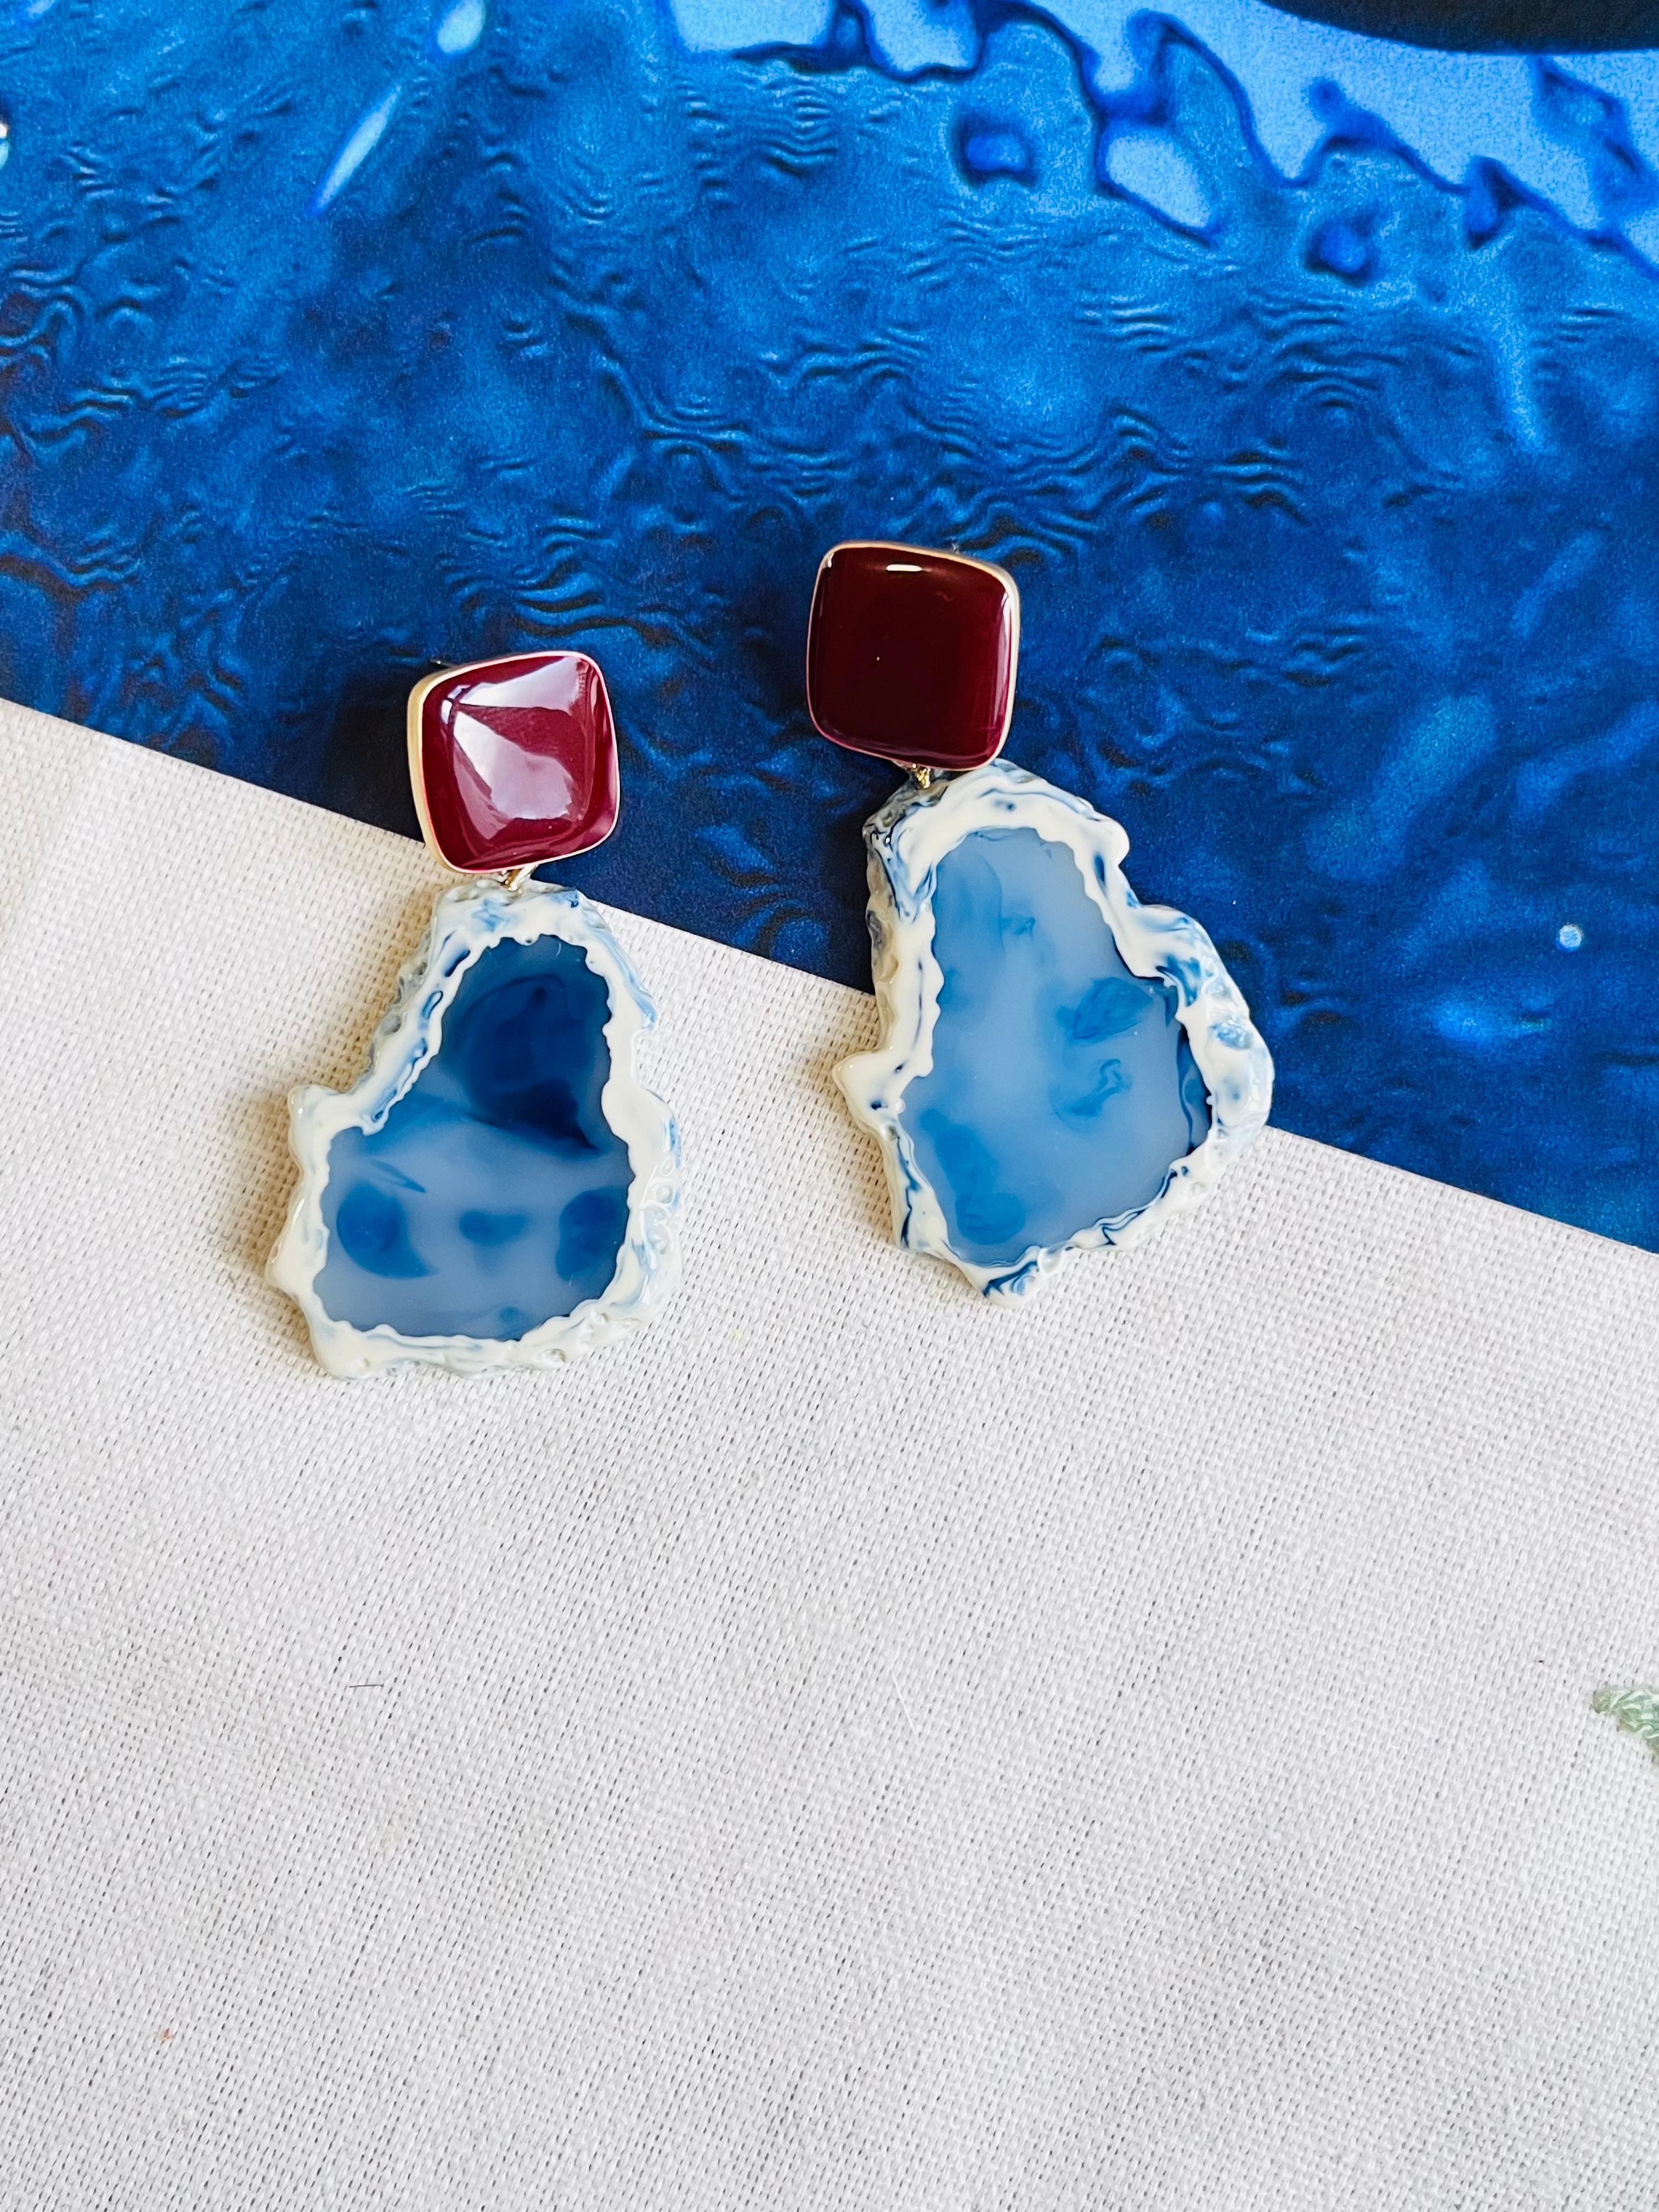 The cost is very high. 100% handmade. Excellent gift for lady. Fine handcraft.

Material: Alloy, Faux stone, Resin.

Size: 6.0 cm, 3.0 cm.

_ _ _

Great for everyday wear. Come with velvet pouch and beautiful package.

Makes the perfect gift for